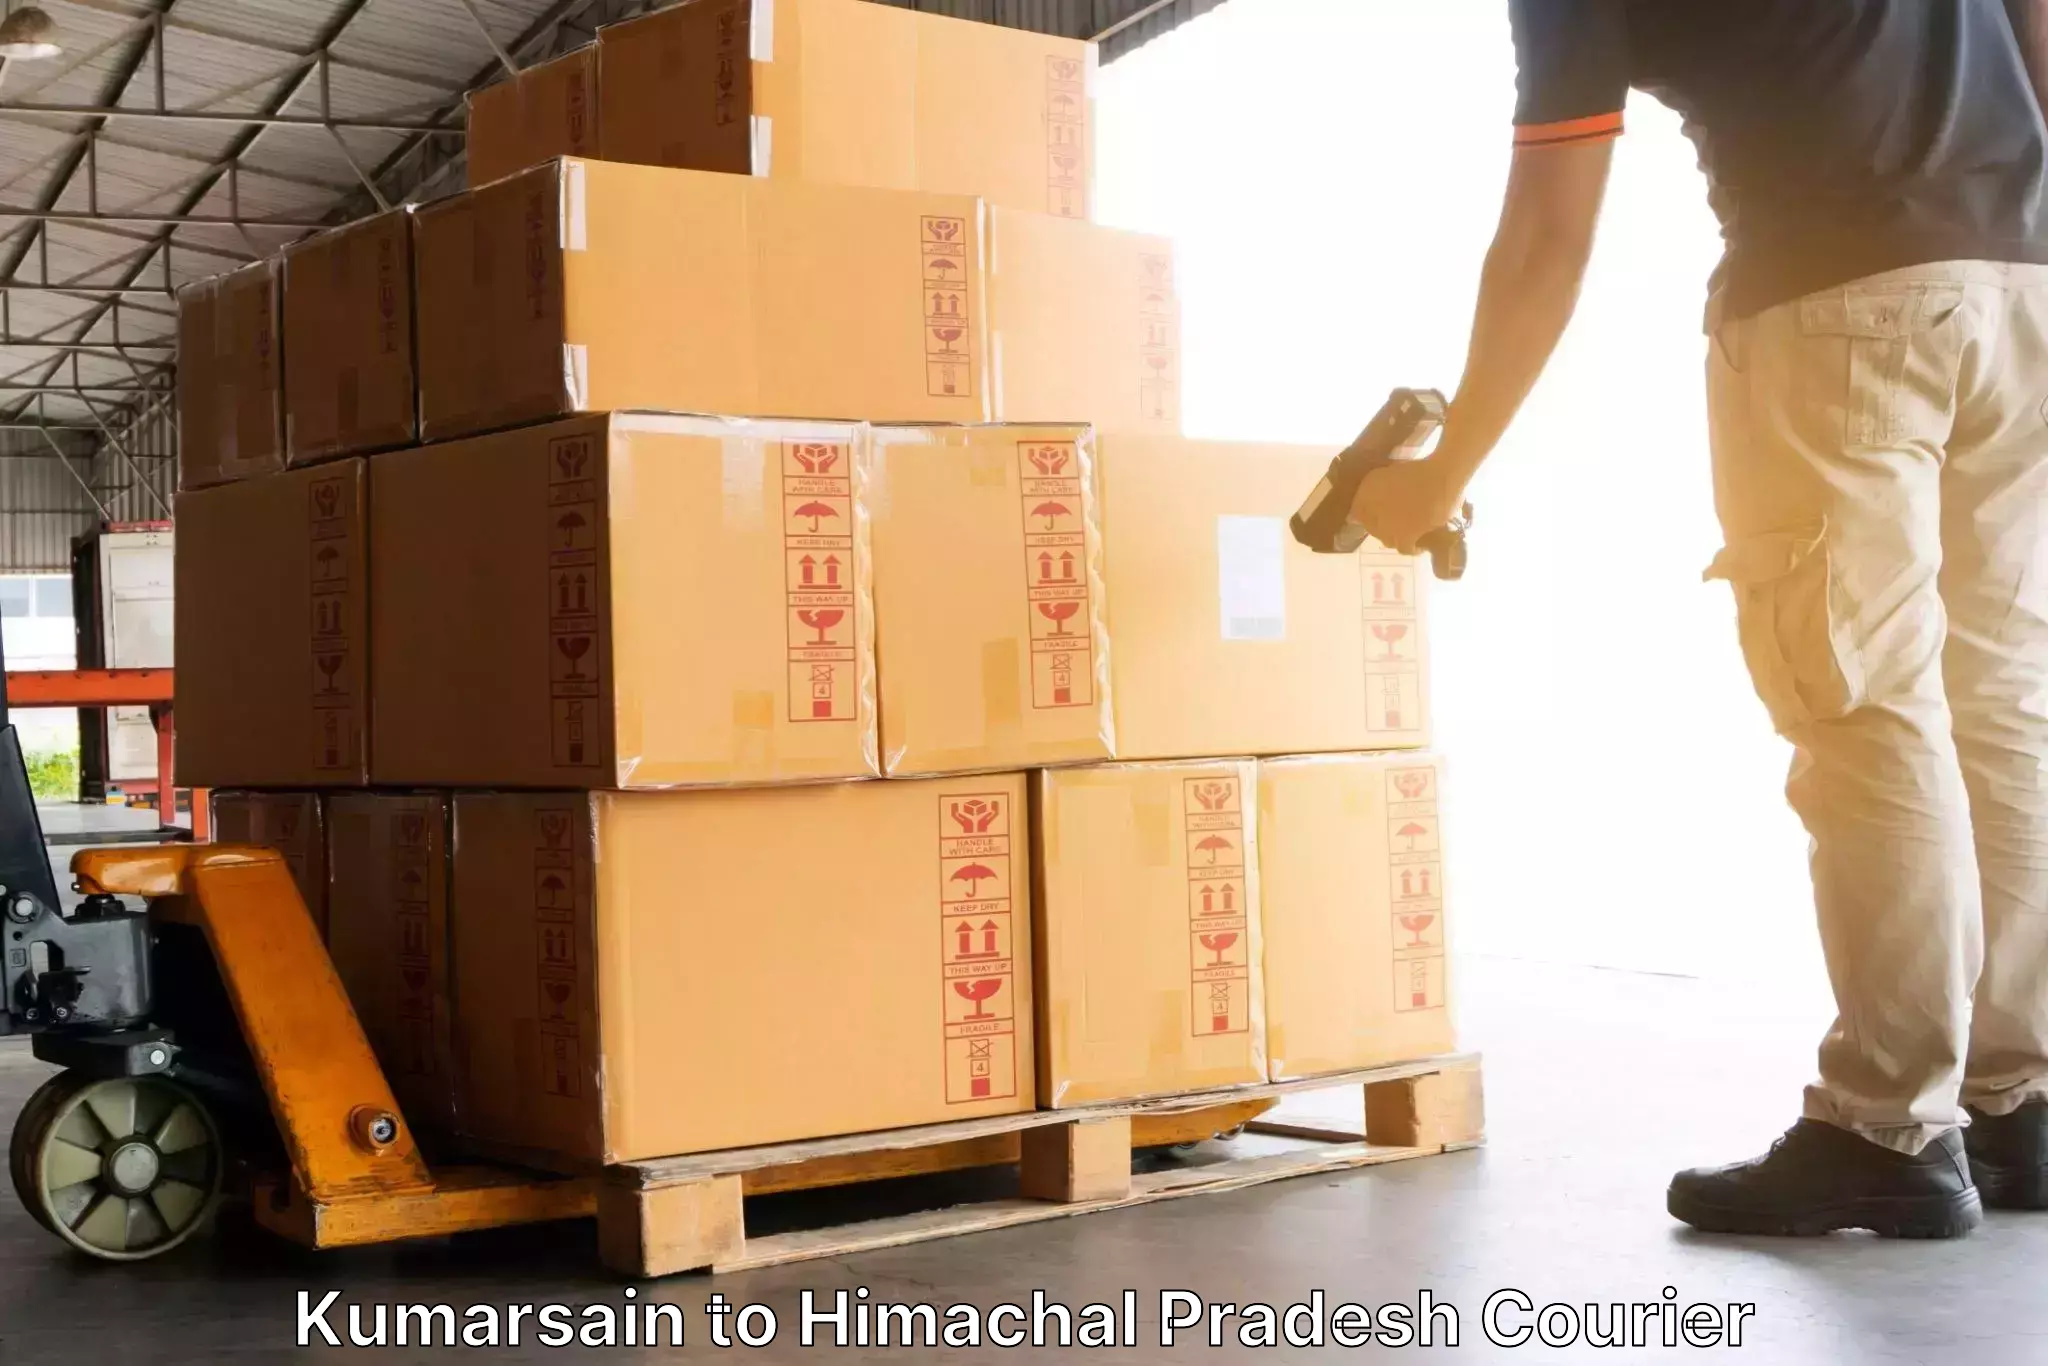 Customized delivery options in Kumarsain to Himachal Pradesh